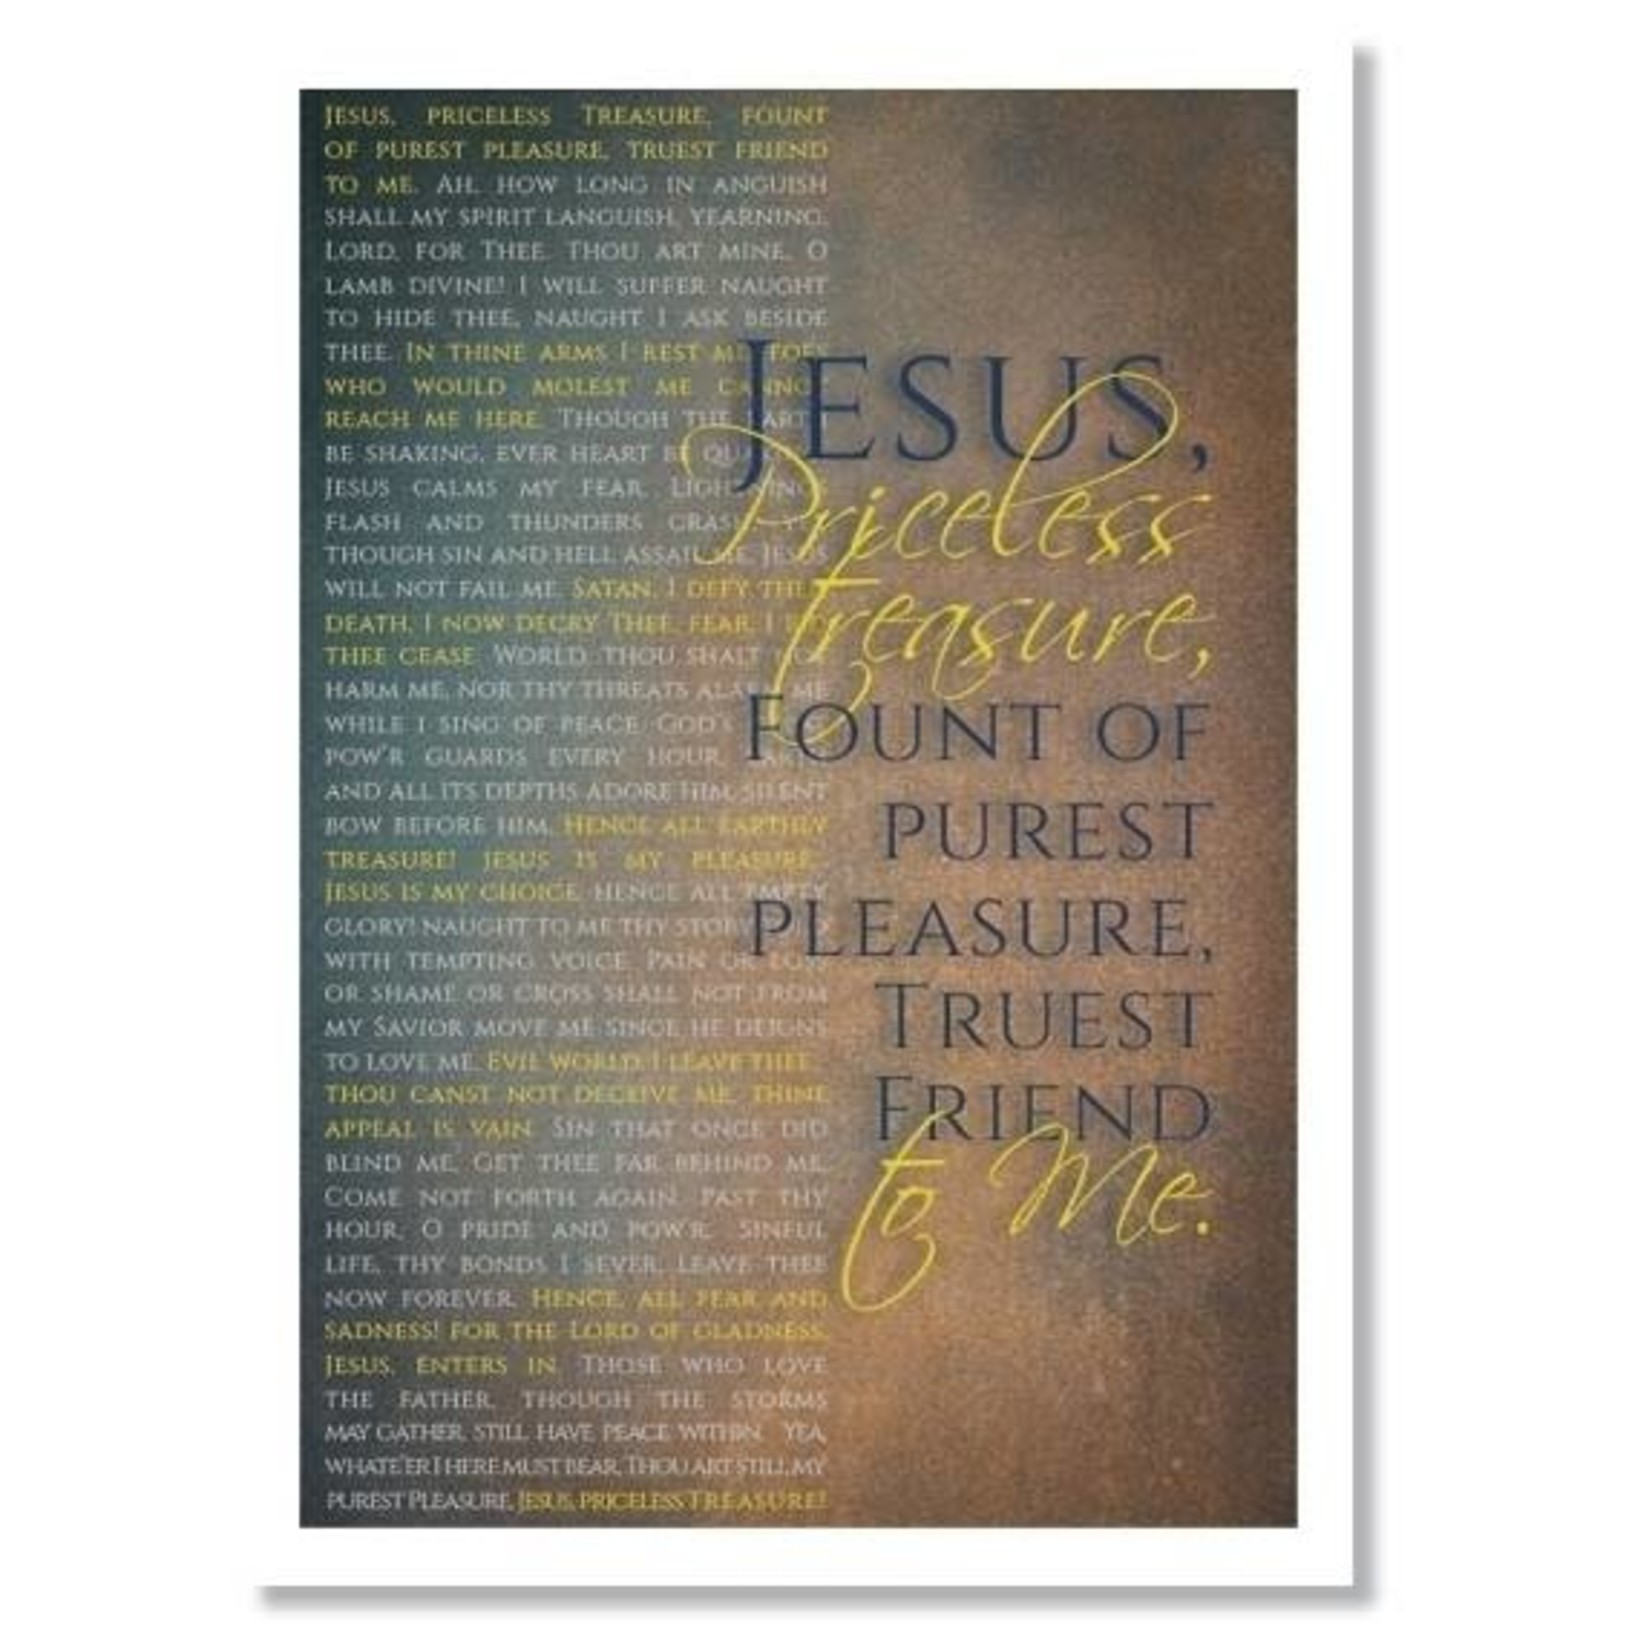 Hymns In My Heart - 5x7" Greeting Card - Encouragement - Jesus Priceless Treasure